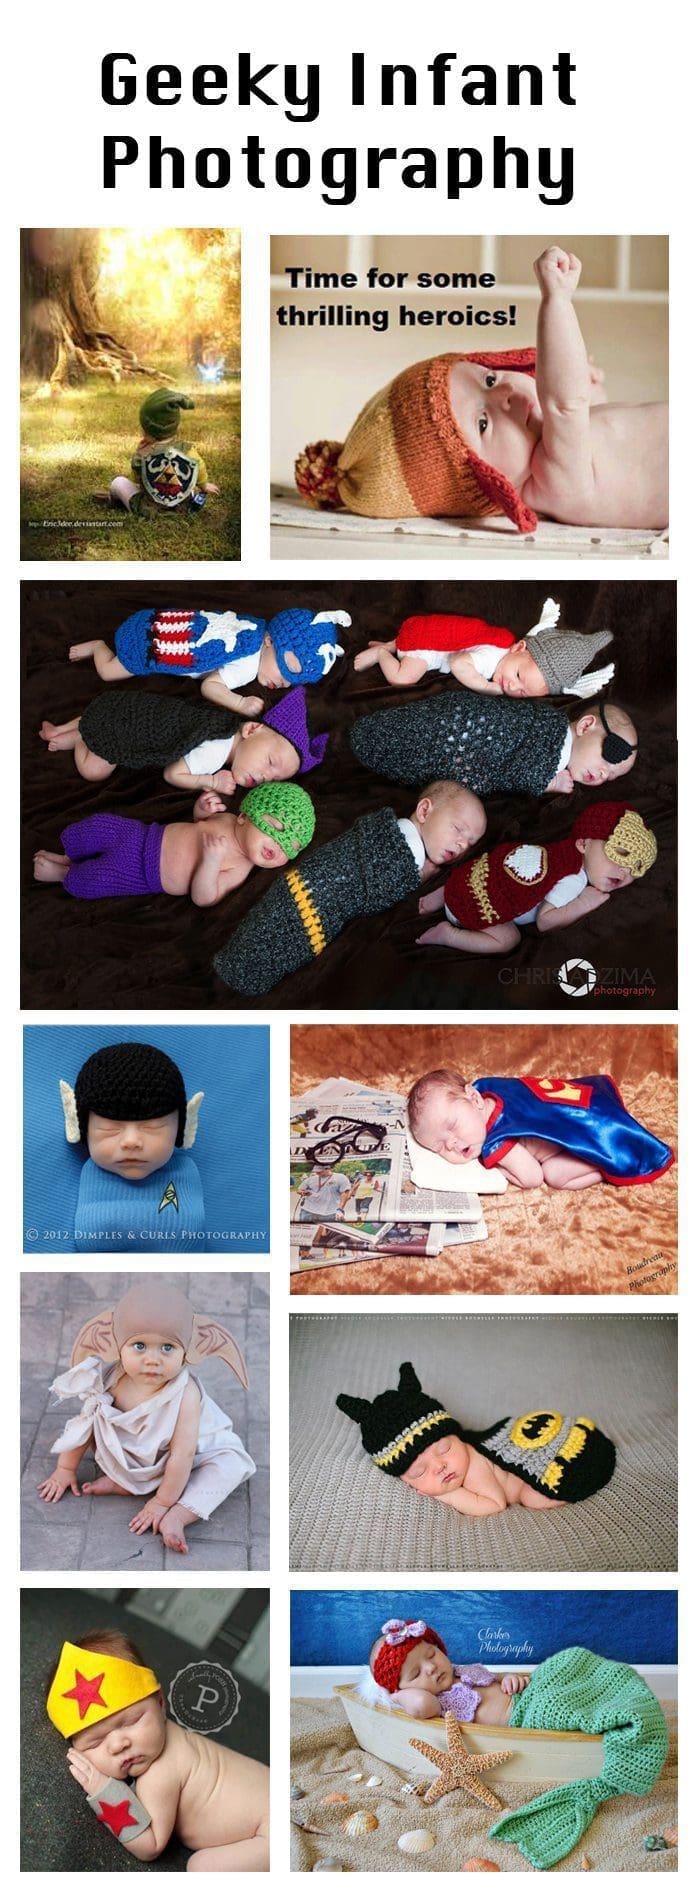 geeky infant photo